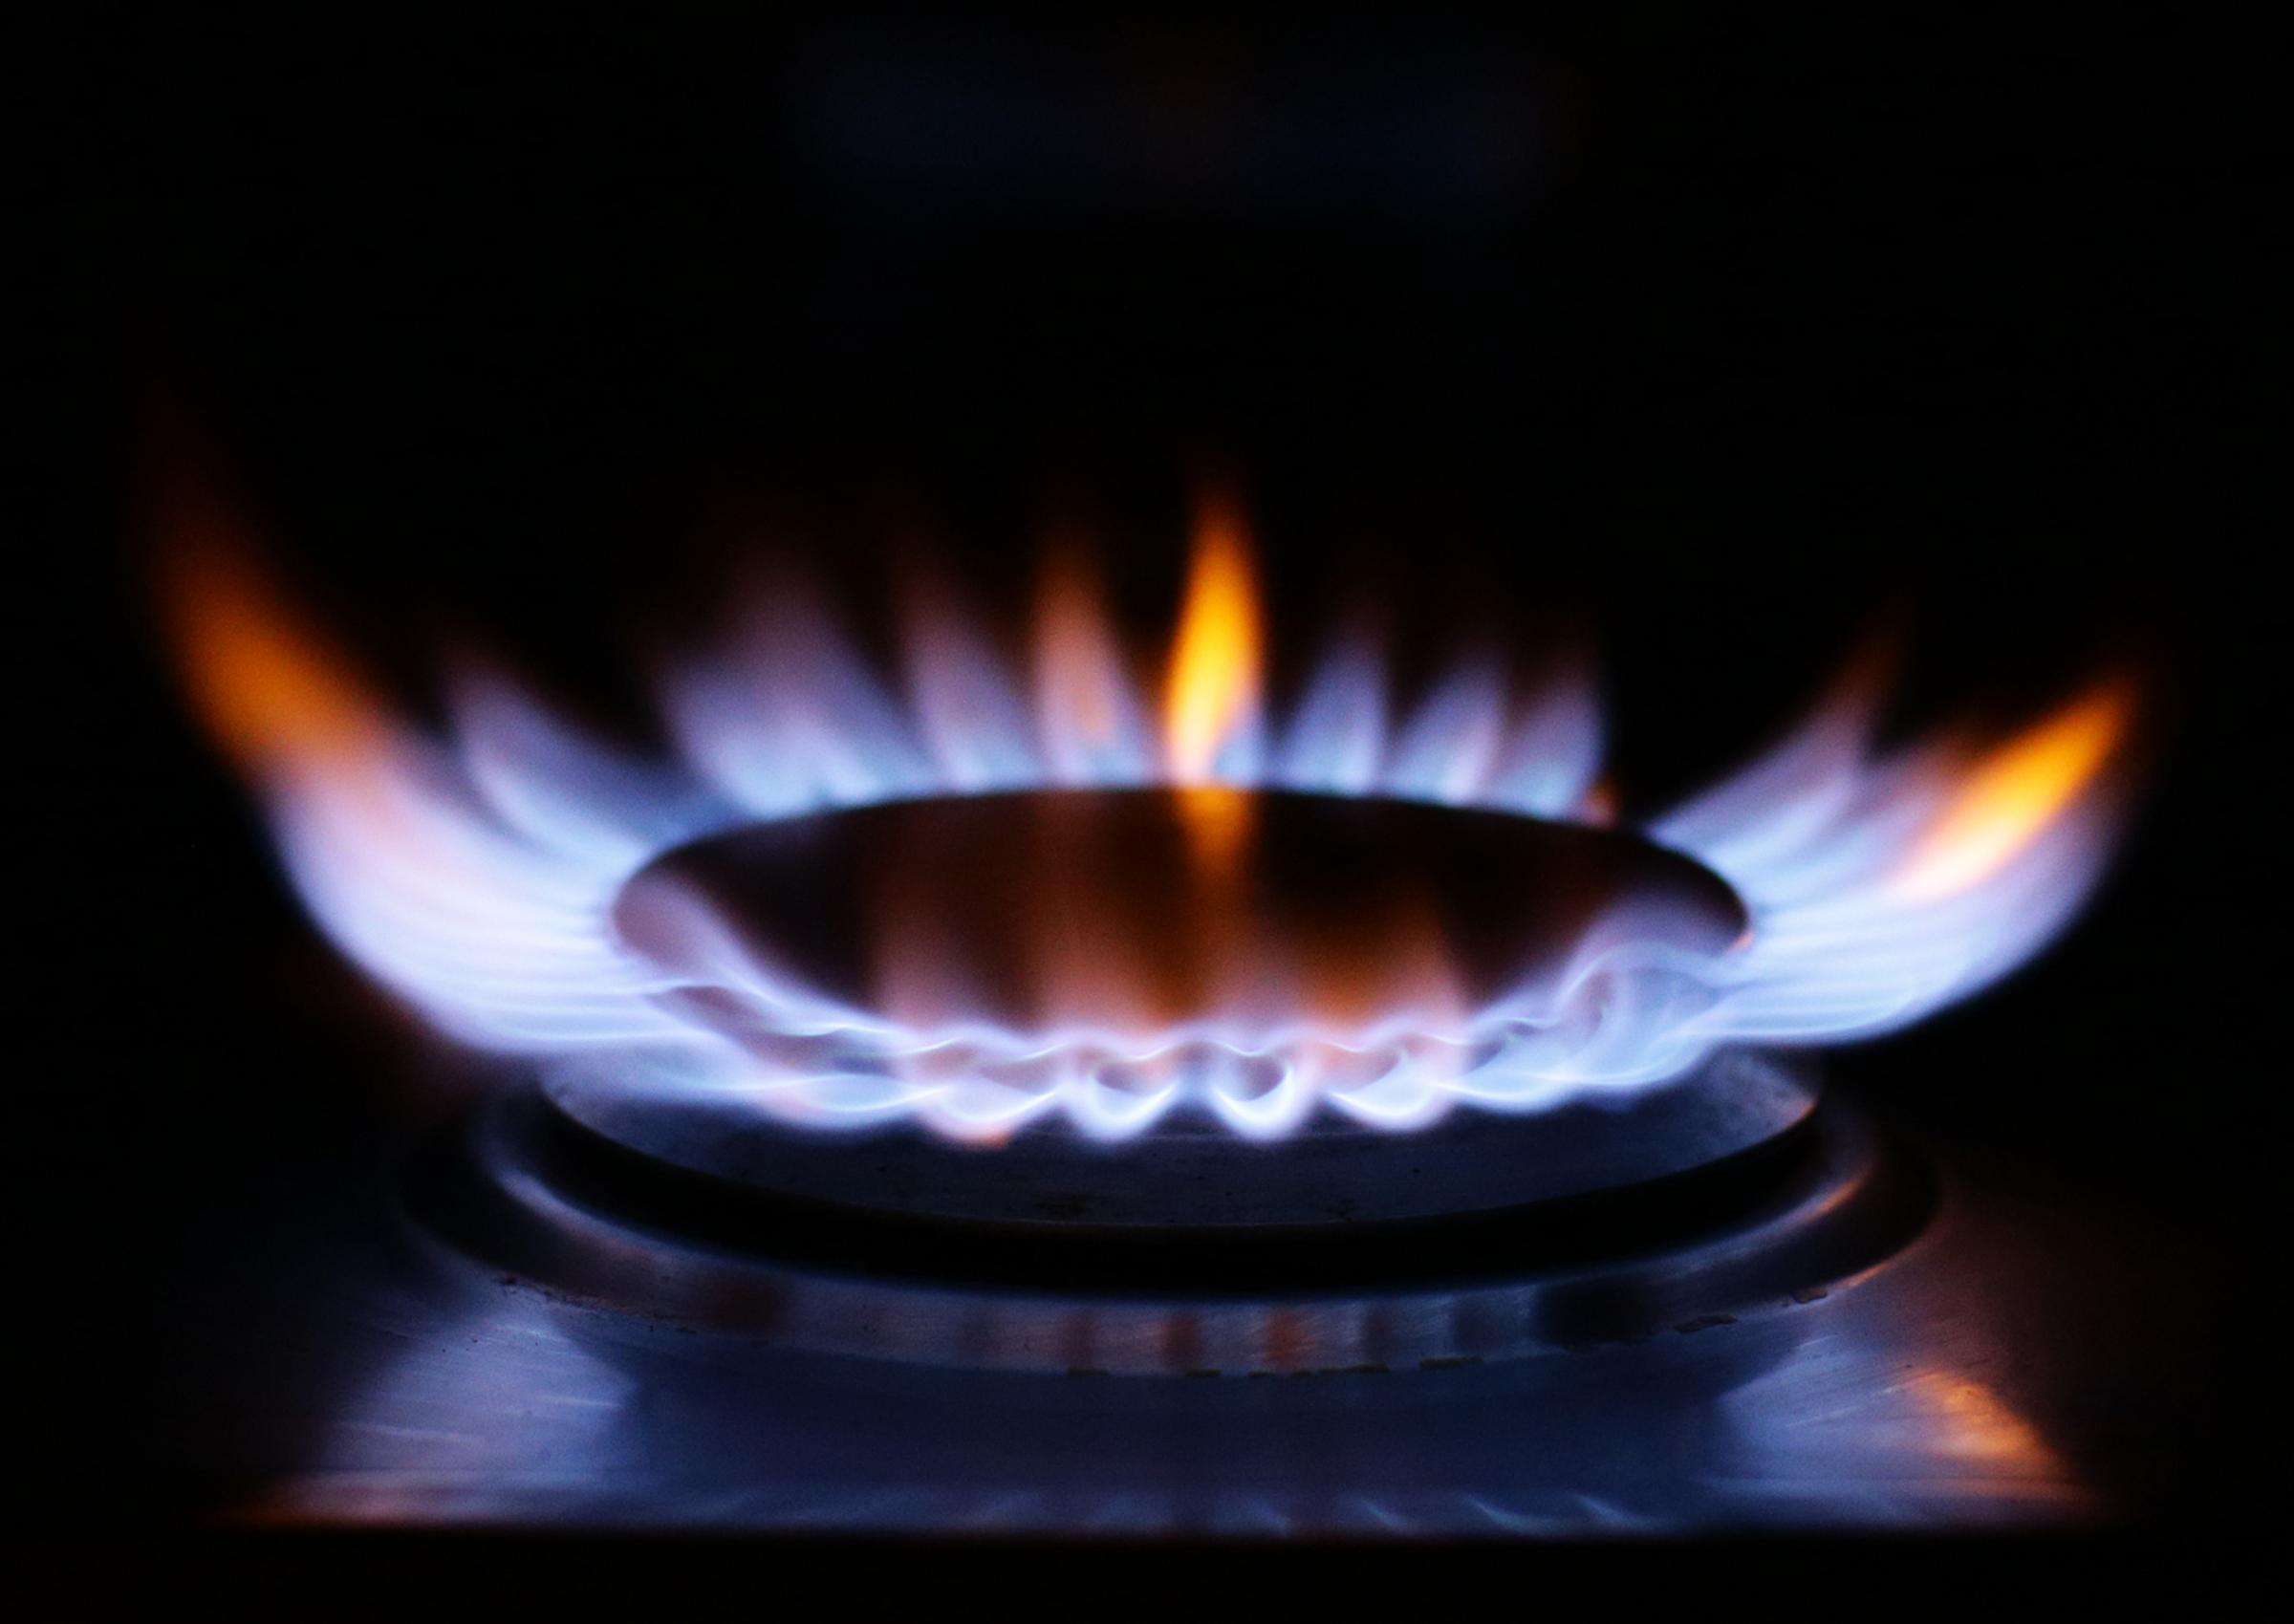 Iain Macwhirter: Don't refuse to pay energy bills. They'll get you in the end